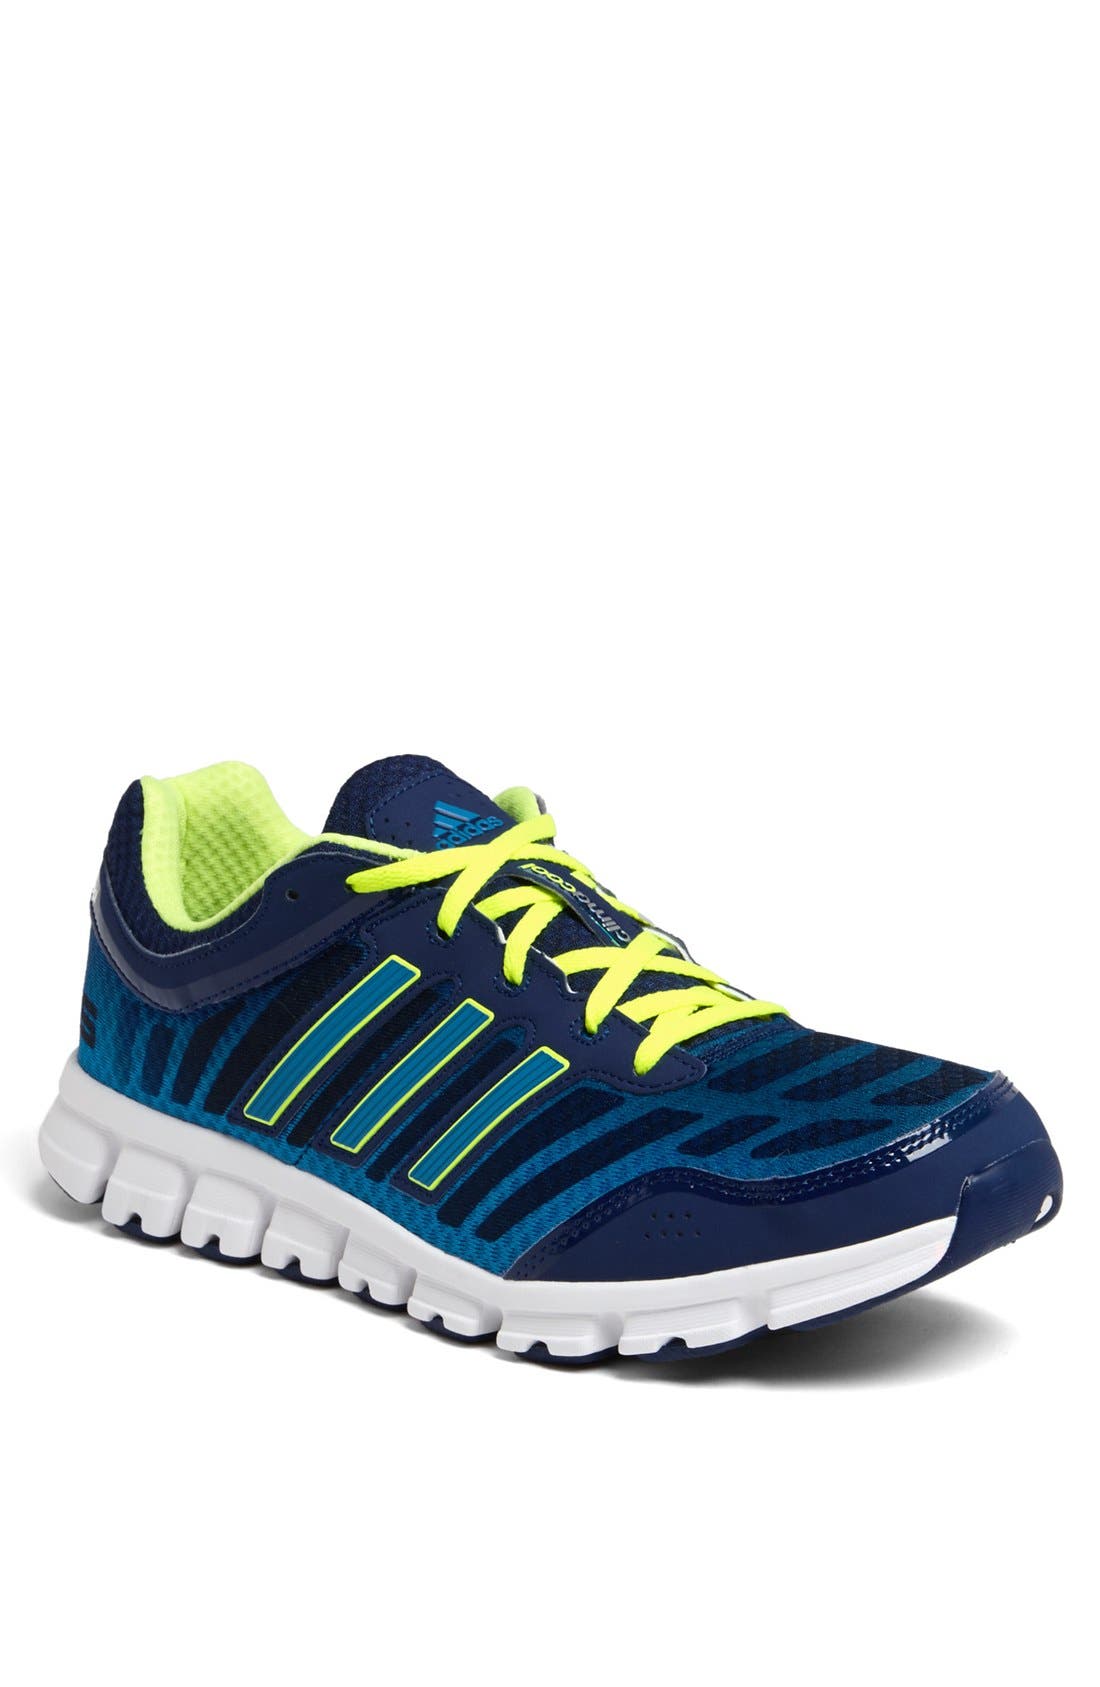 adidas climacool aerate 2 women's